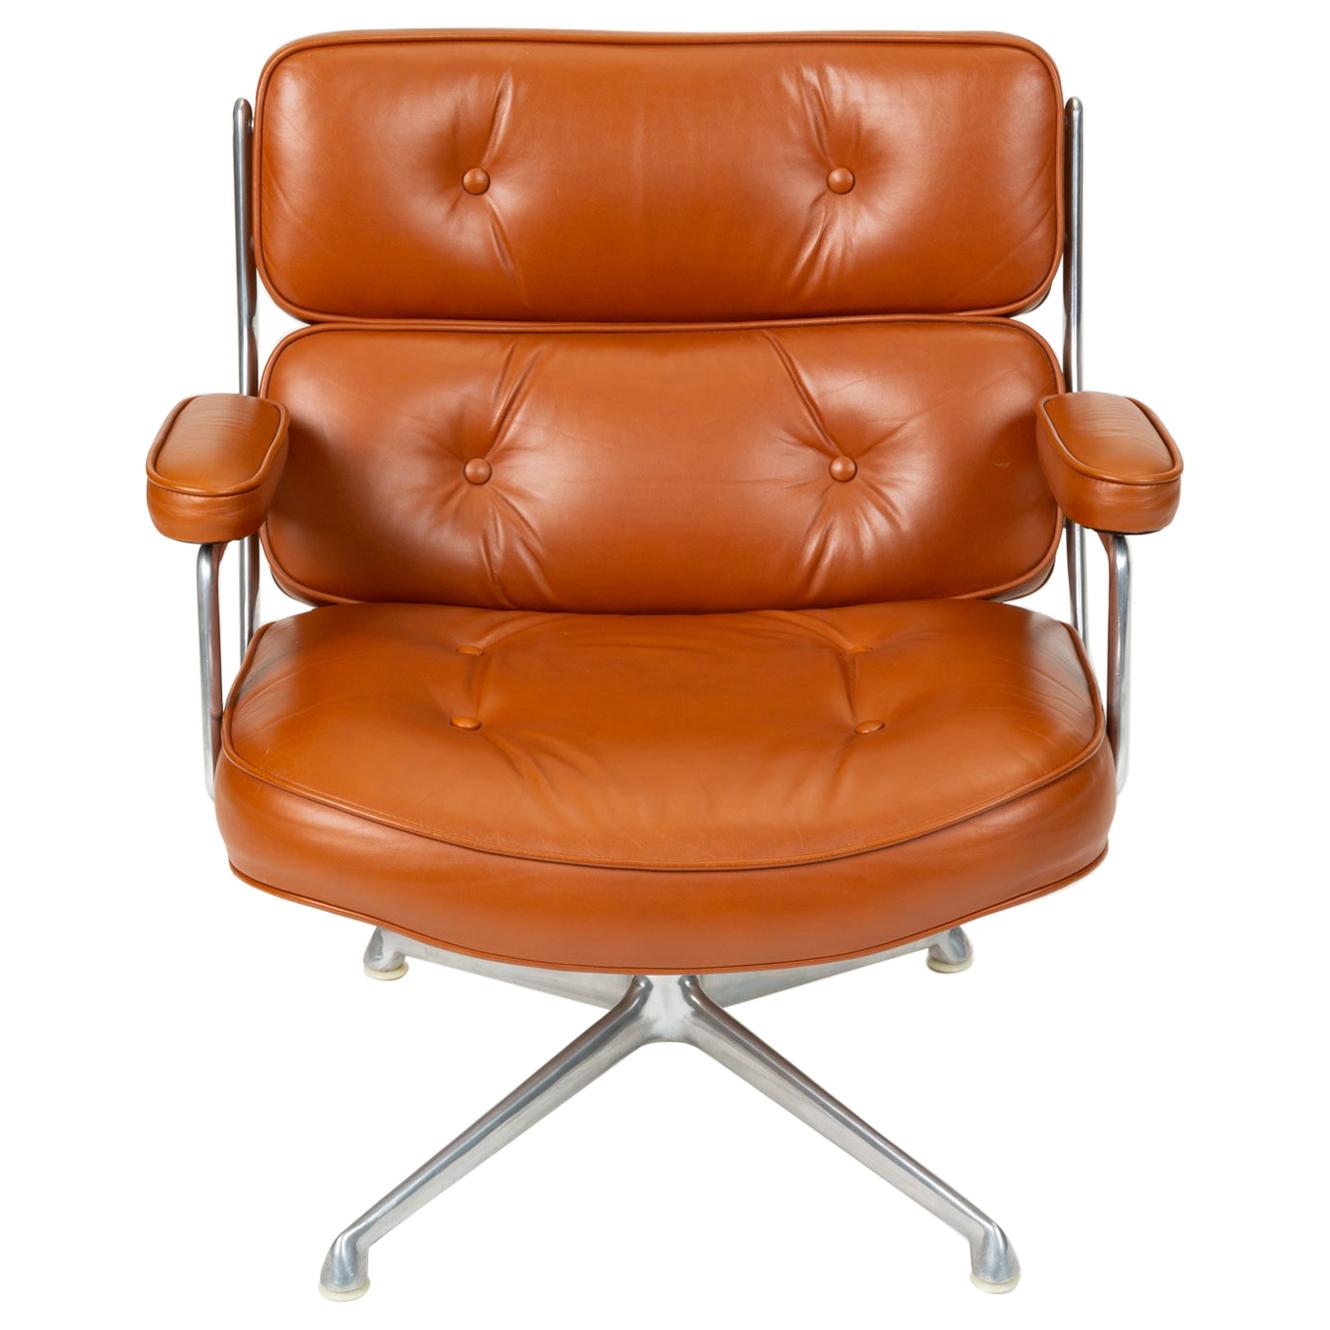 Ray and Charles Eames Time Life Lobby Chair in Cognac Leather